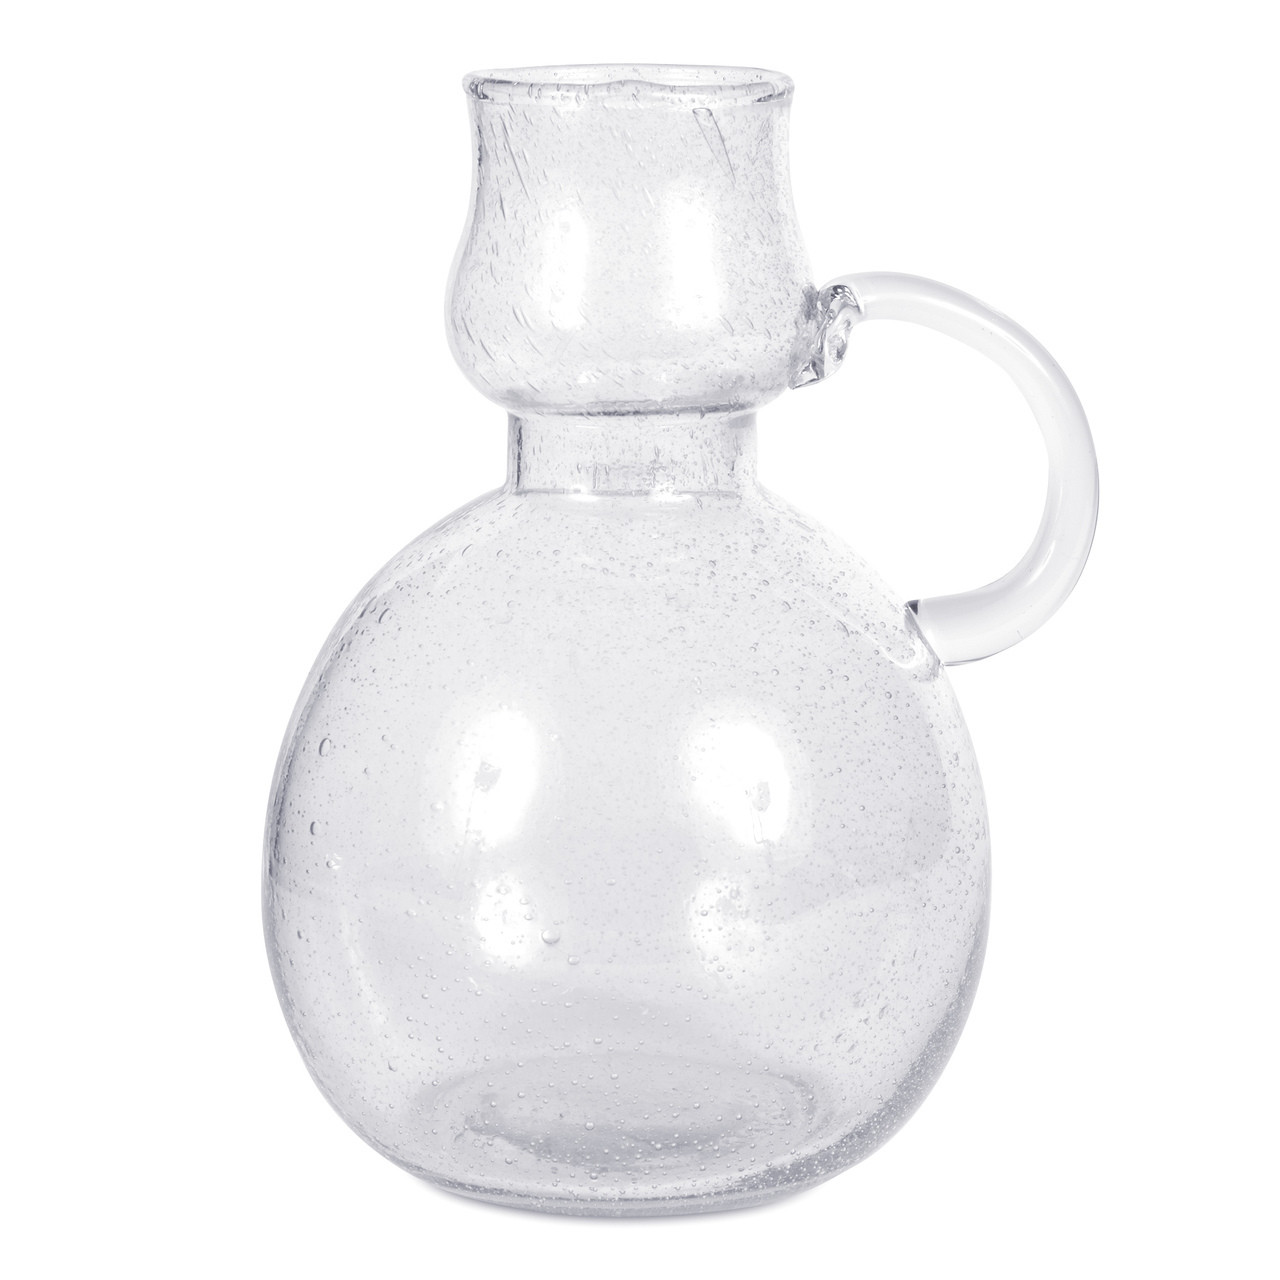 https://cdn11.bigcommerce.com/s-5bdhee5215/images/stencil/1280x1280/products/1099/2381/glassware_pitcher__66958.1485980806.1280.1280__92950.1613588004.jpg?c=2